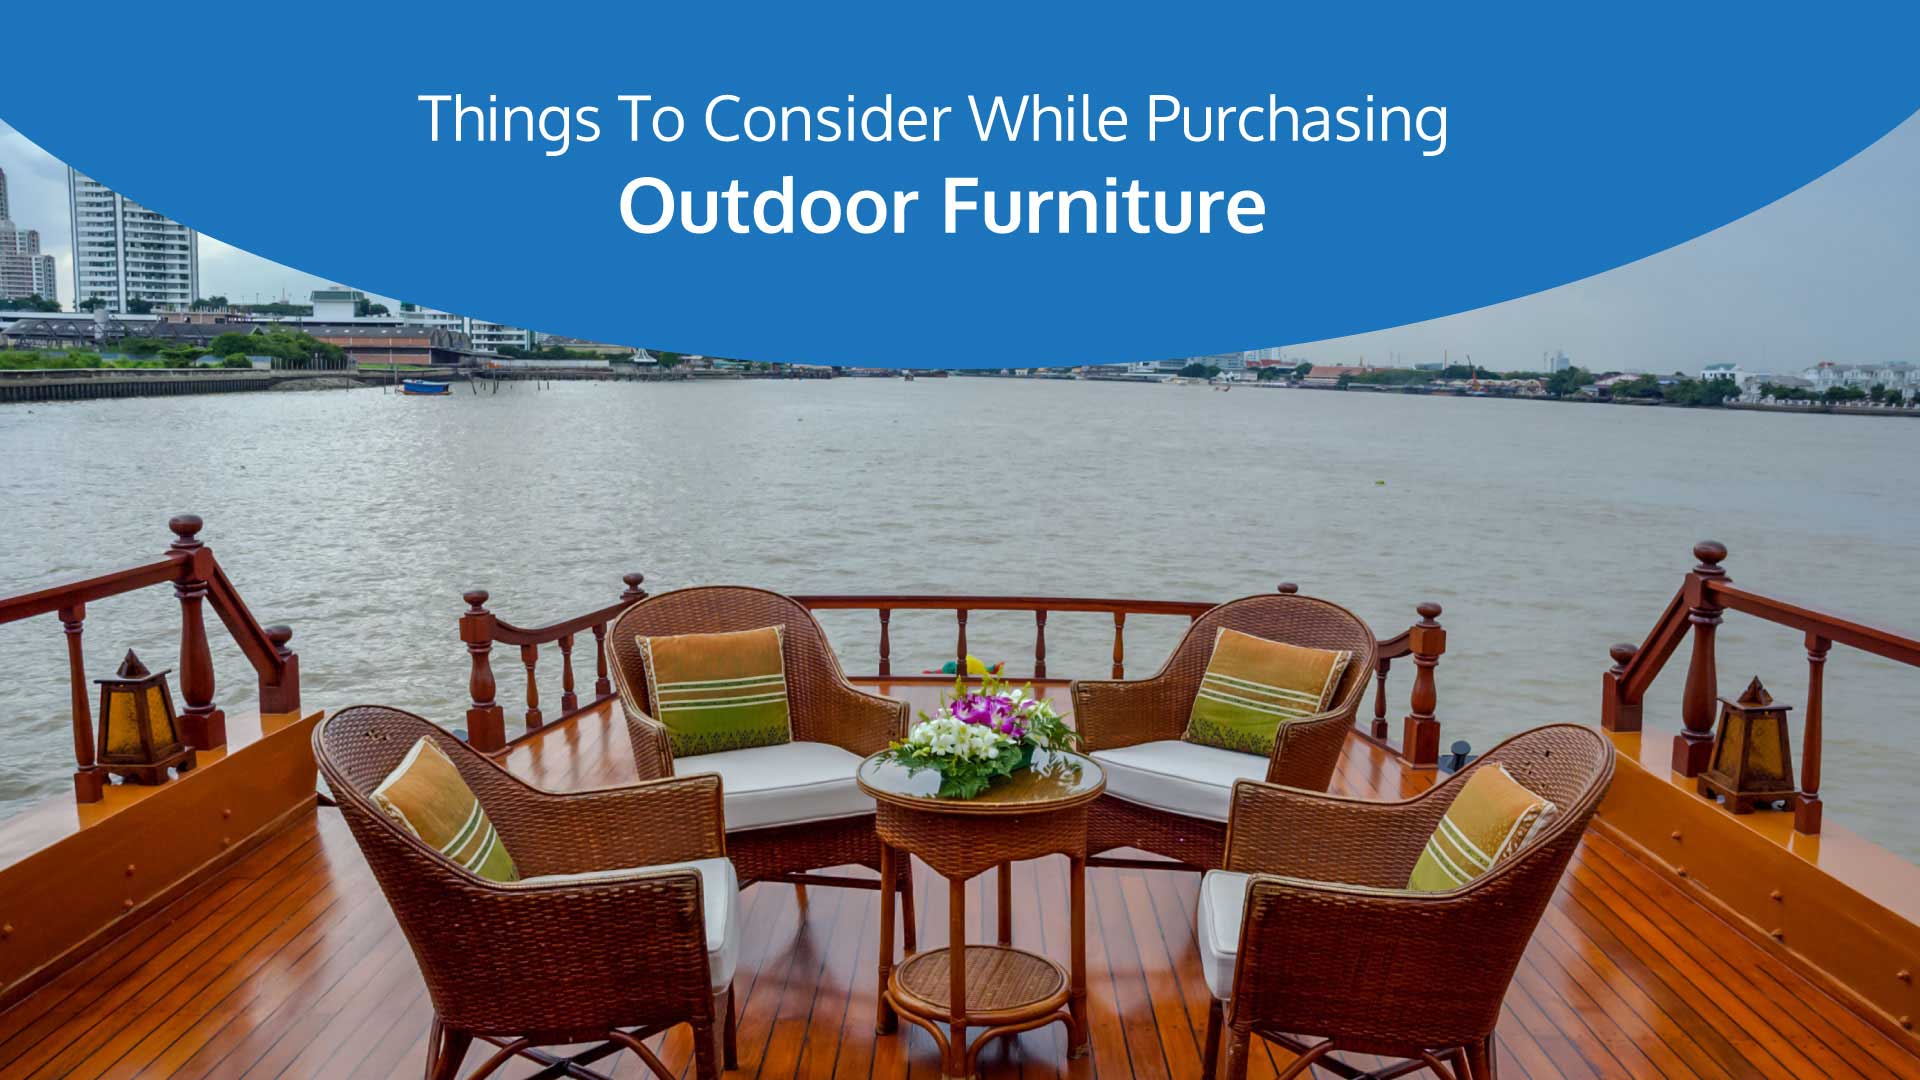 Things to consider while purchasing outdoor furniture